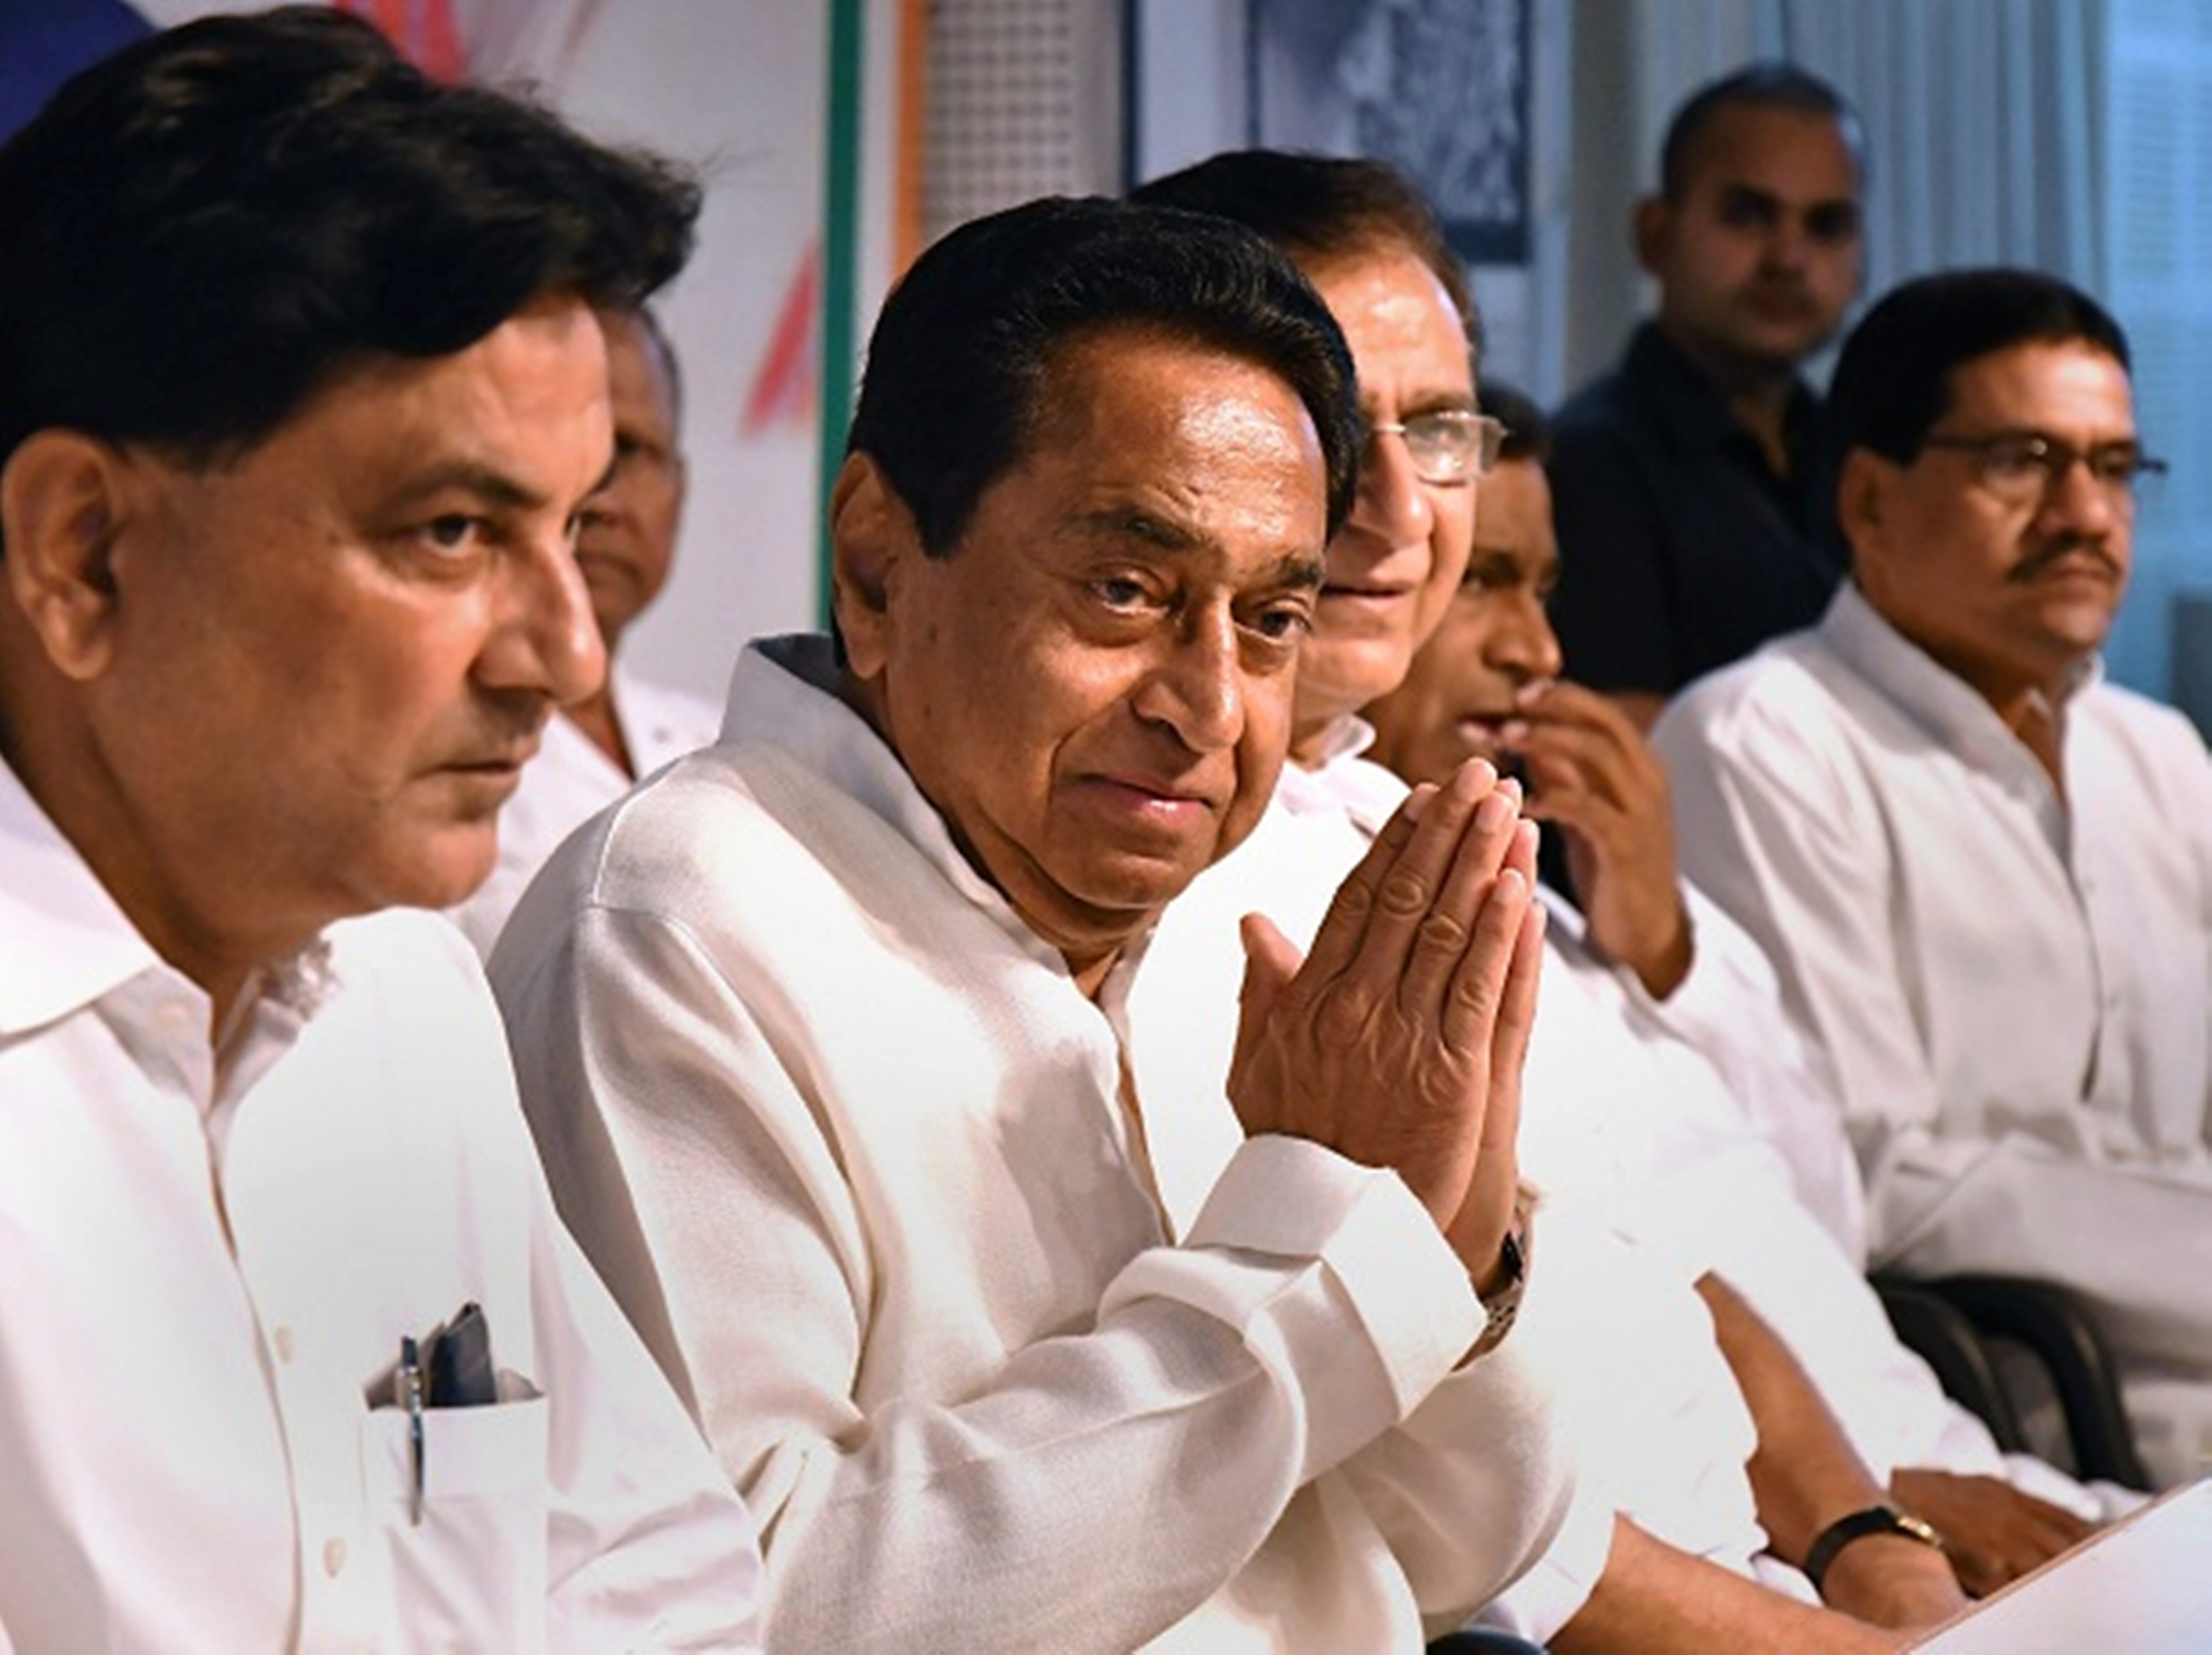 kamal nath birth place in kanpur and Can become cm of mp